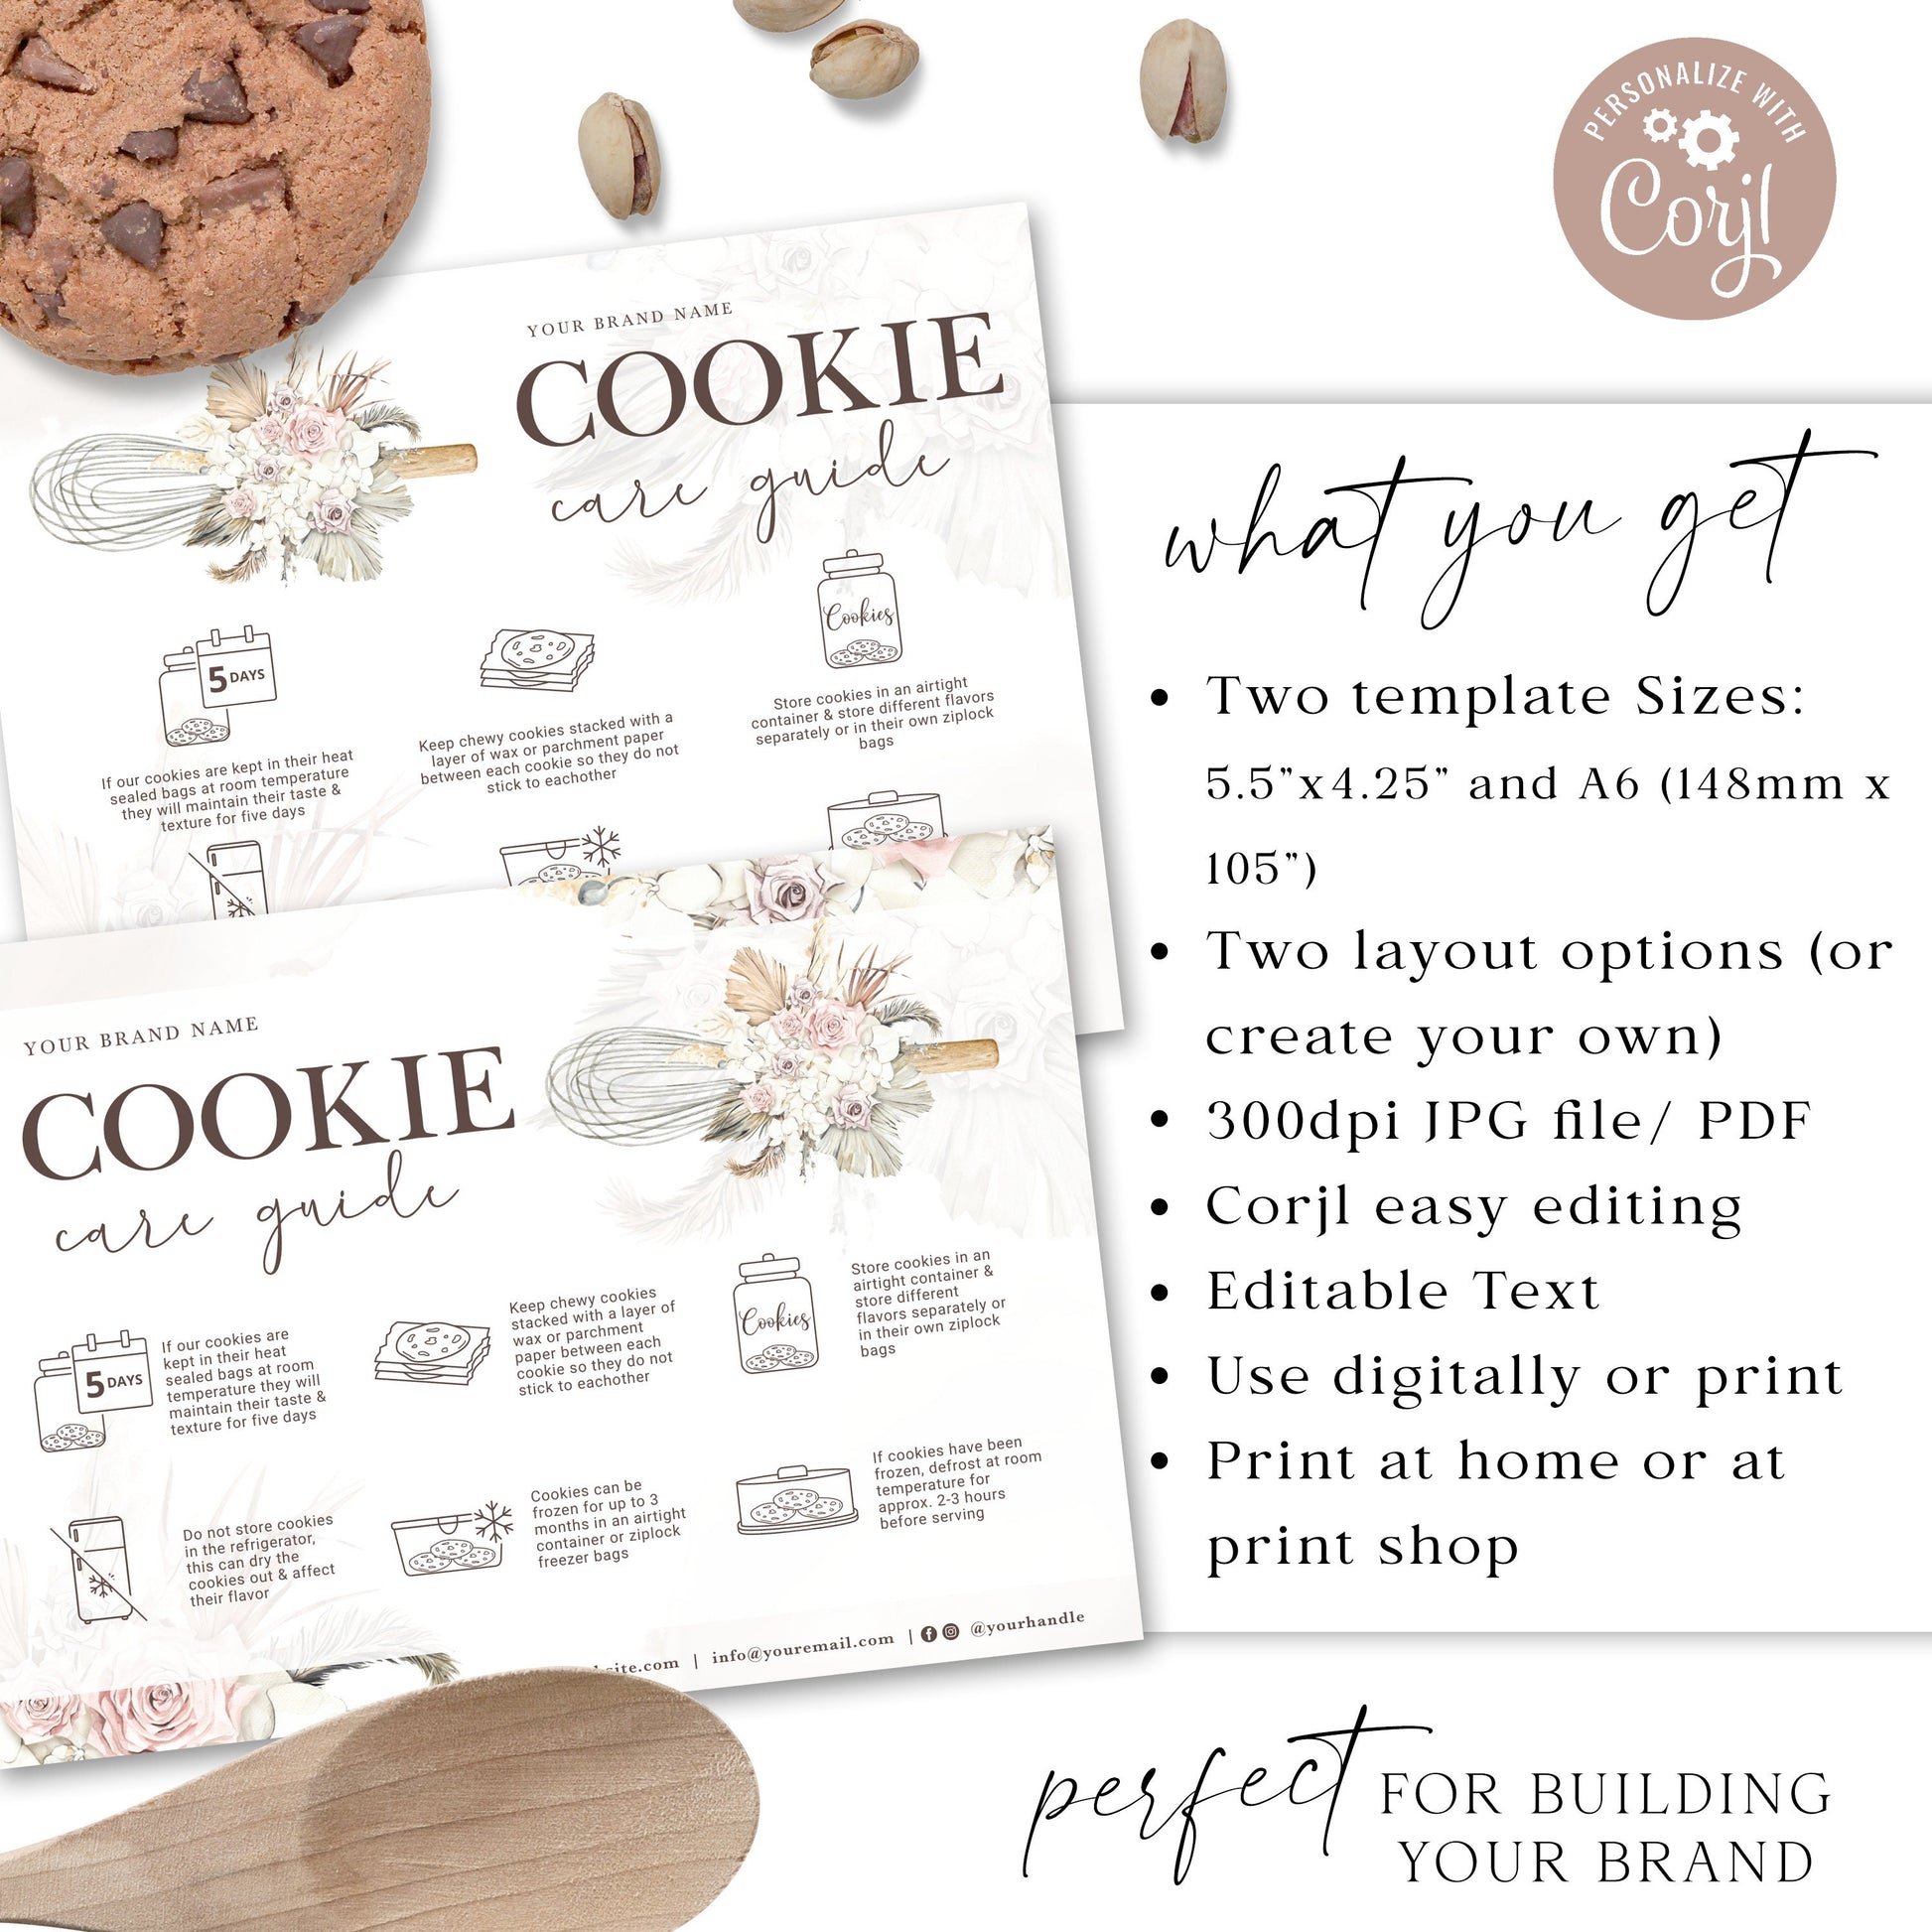 Editable Cookies Care Card, (2 Sizes) Printable Cookie Care Template, Watercolor Whisk Bakery Guide, Rustic Biscuit Care Instructions VB-001